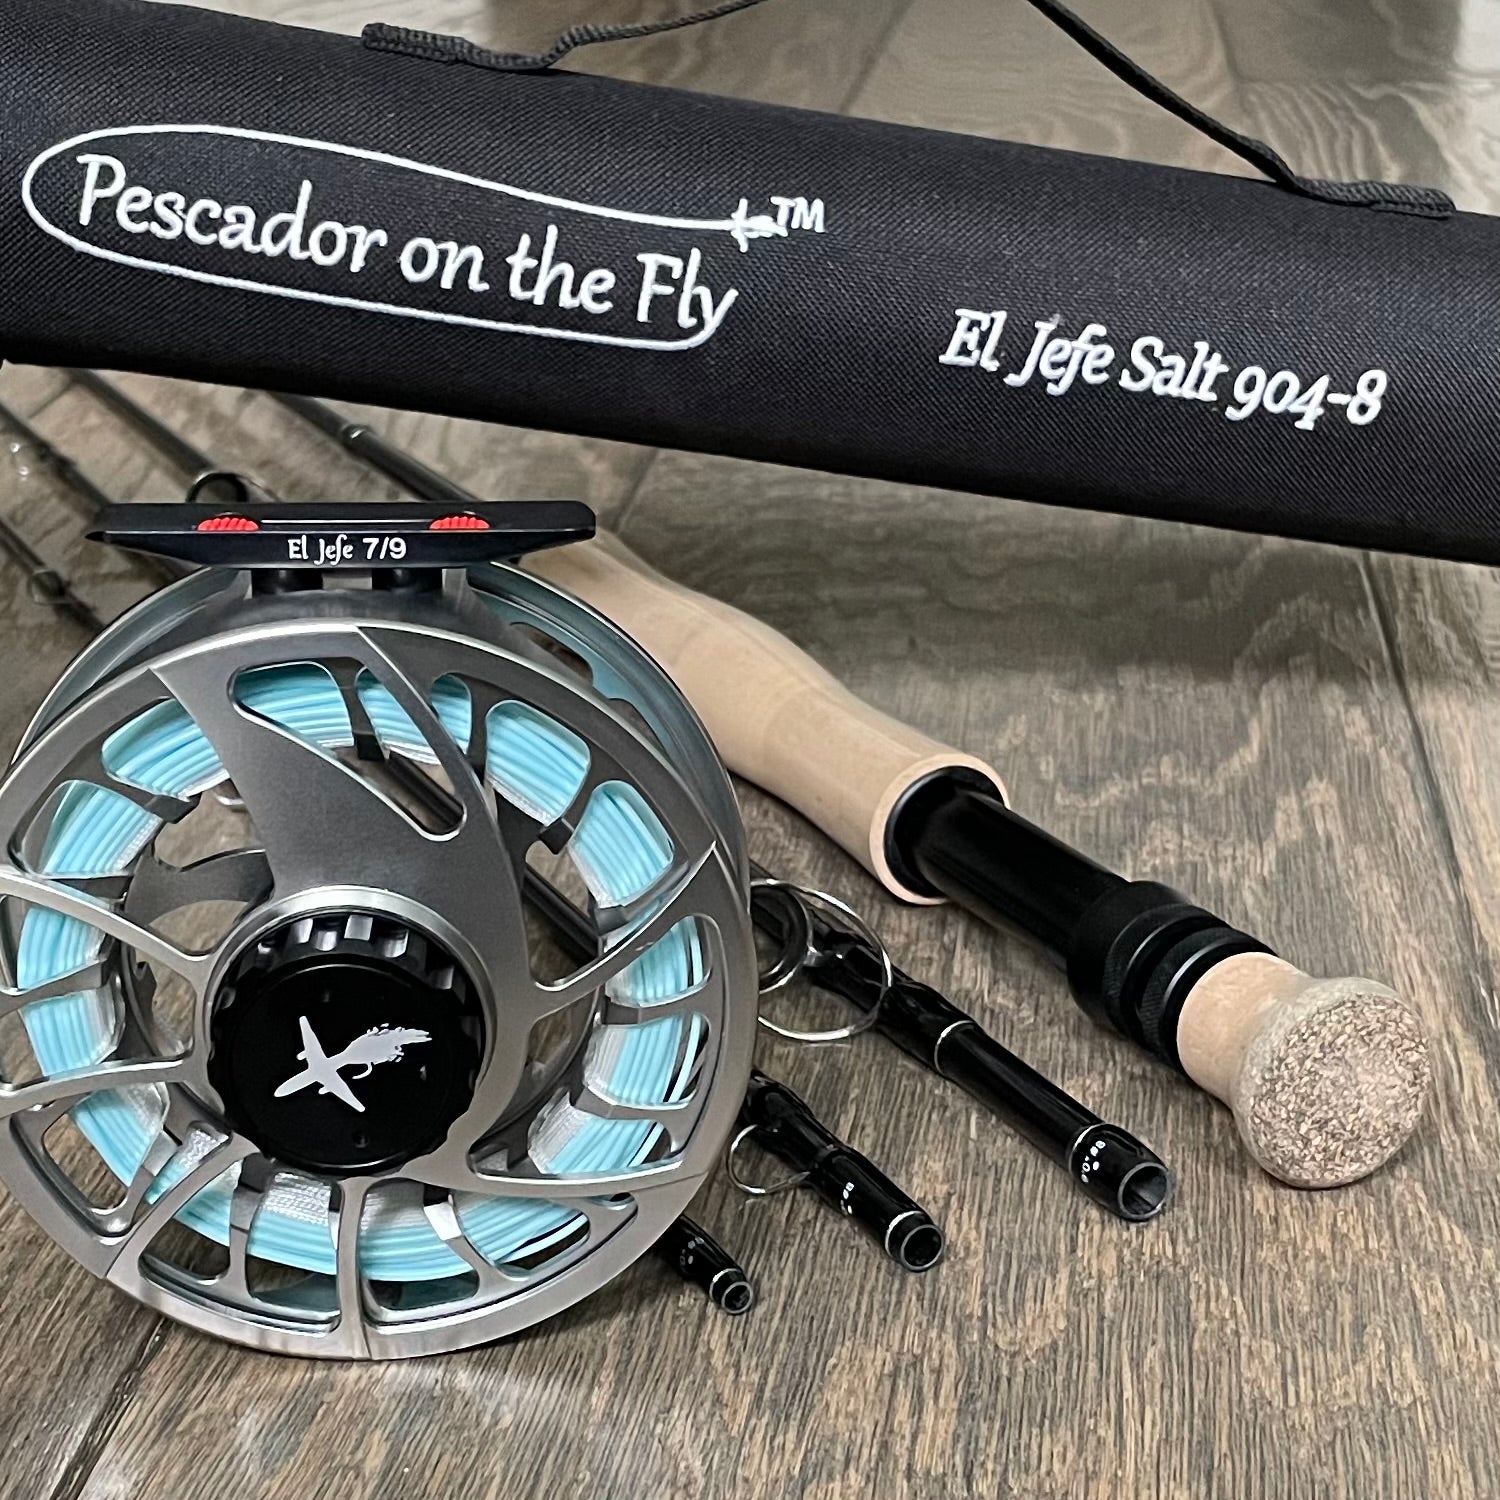 El Jefe Saltwater Fly Fishing Combo Package | 904-7 | 9' Four Section 7 Weight Fly Rod And Reel Outfit